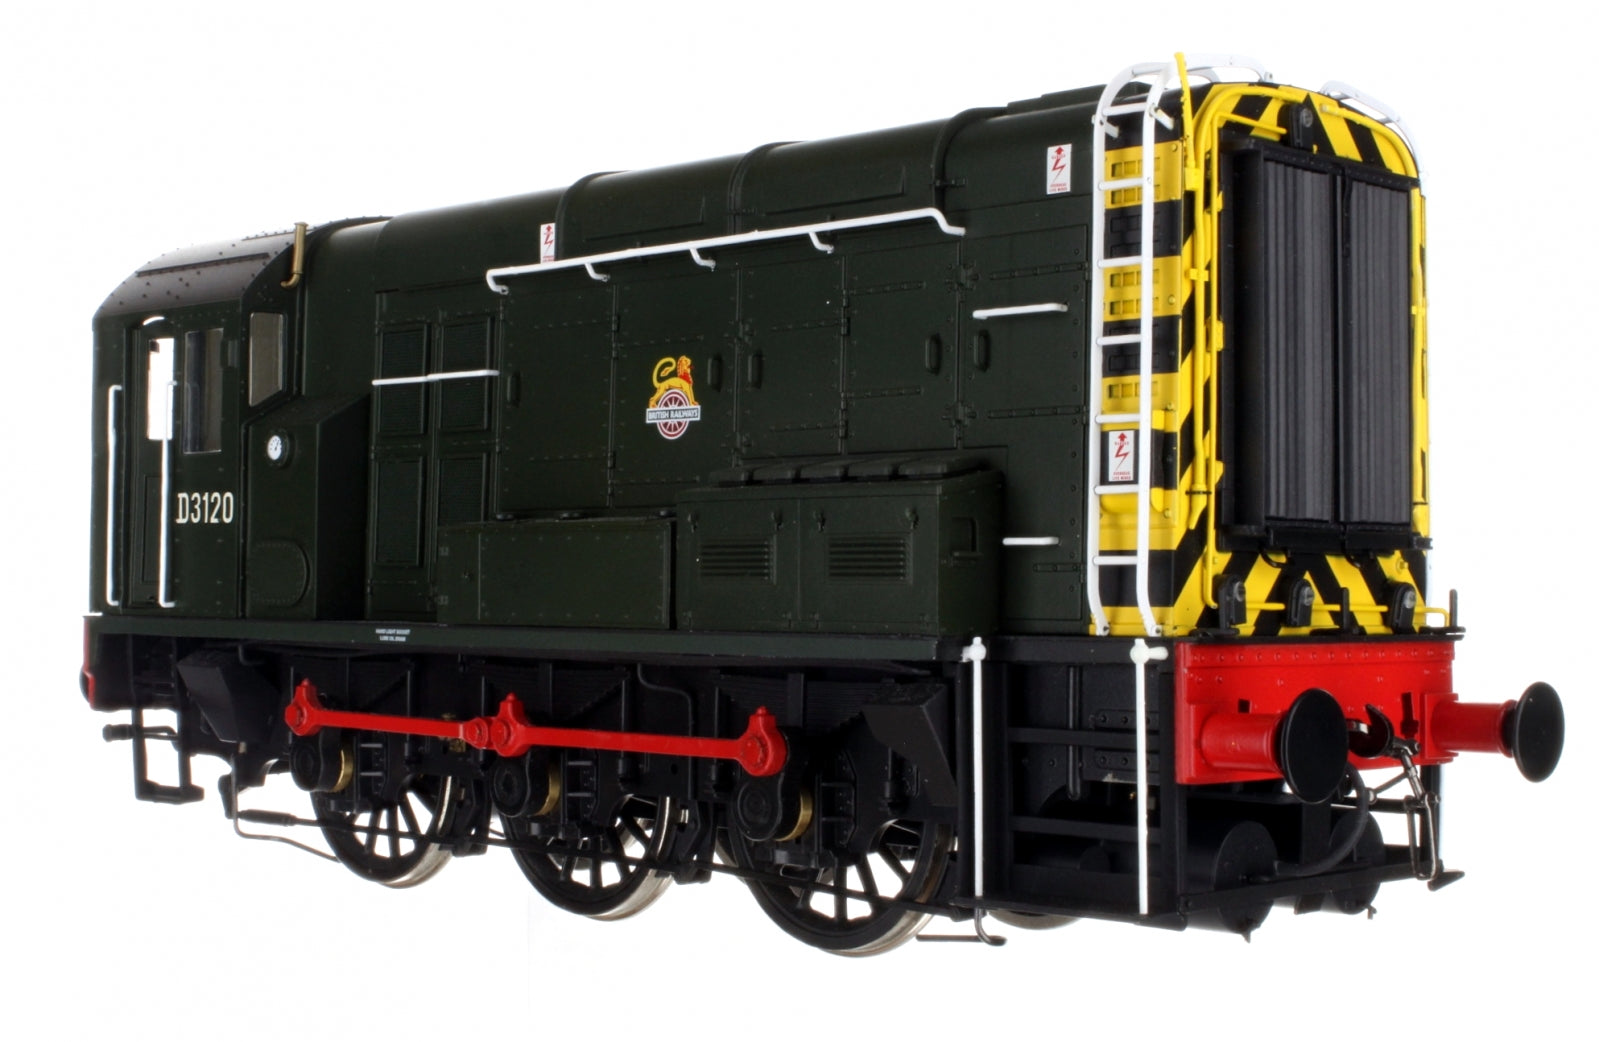 110736 O Gauge Class 08 D3120 BR Green Early Crest Wasp Stripes